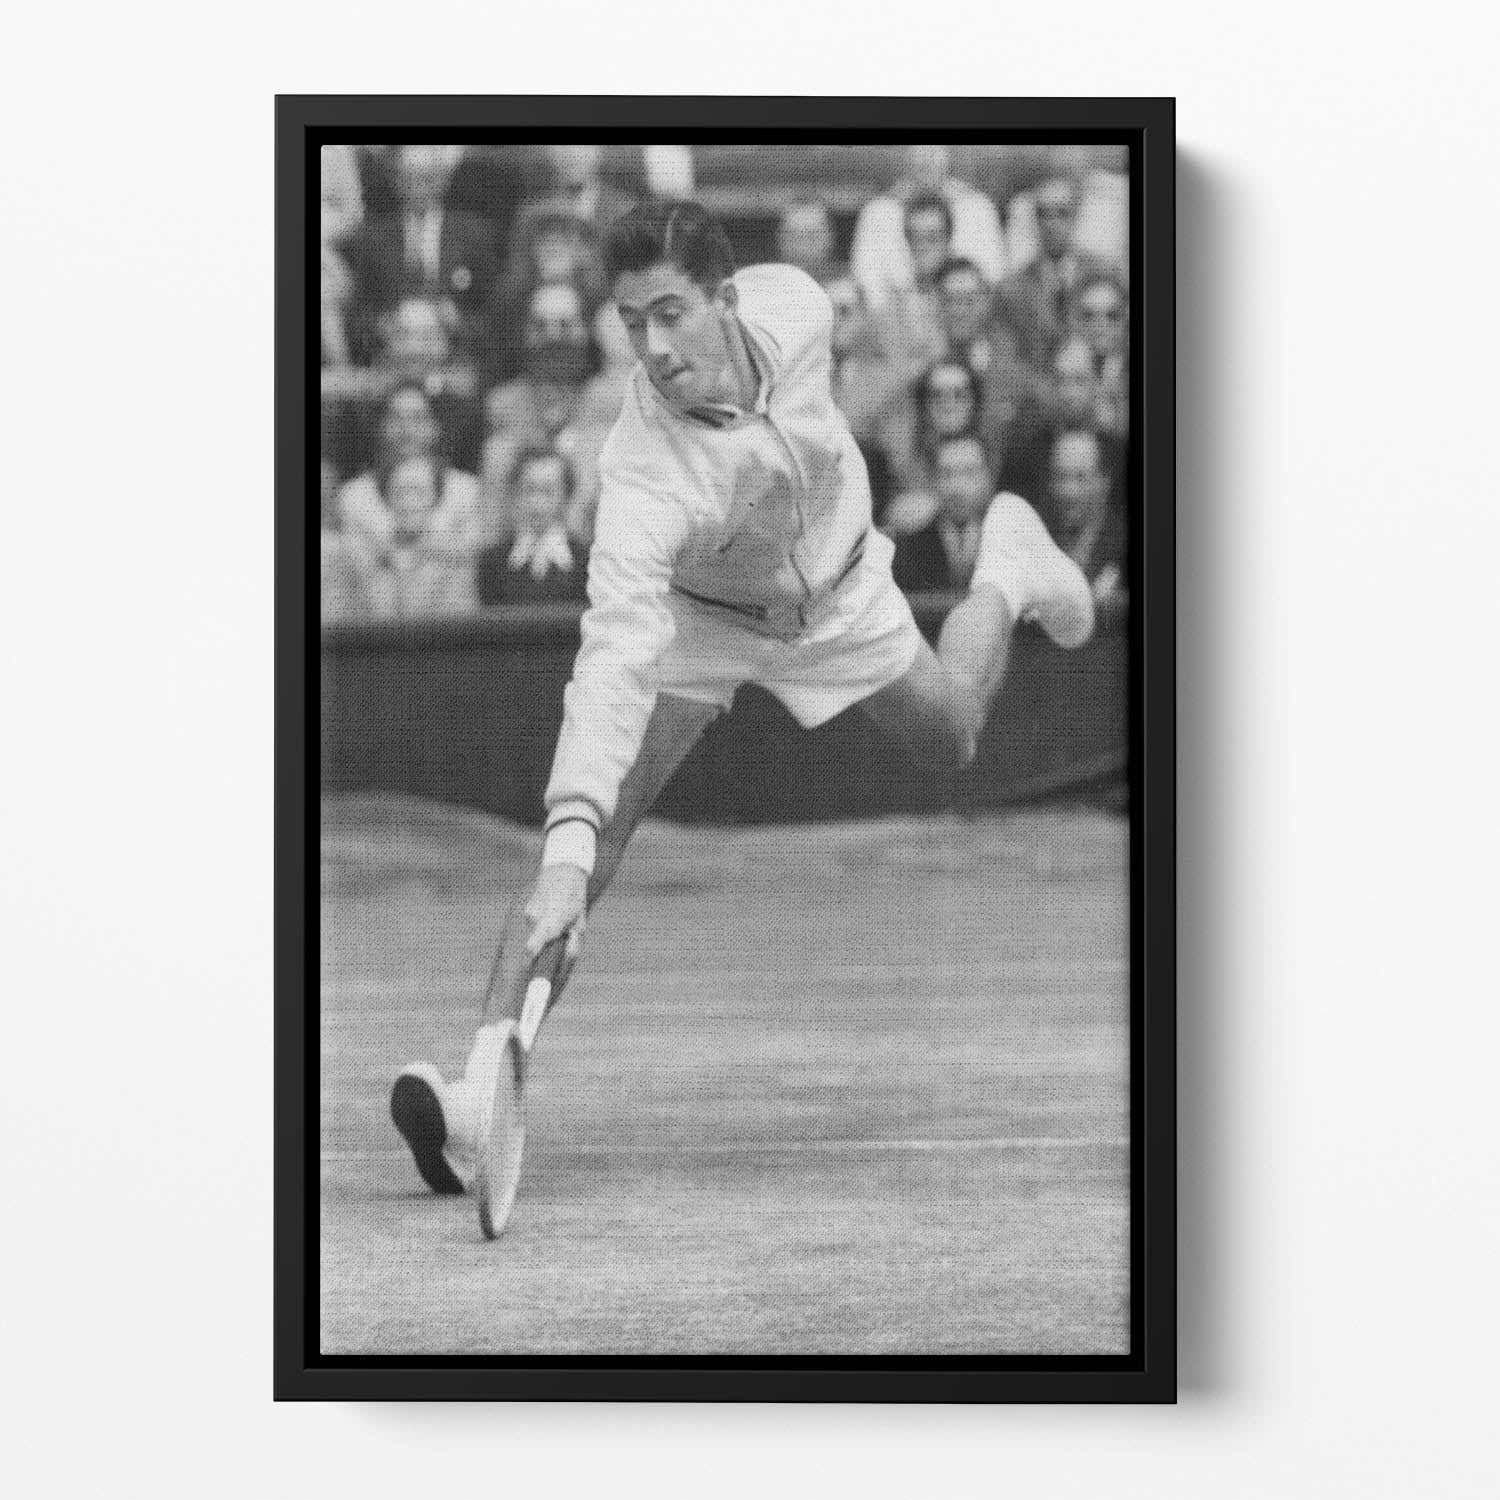 Ken Rosewall in action at Wimbledon Floating Framed Canvas